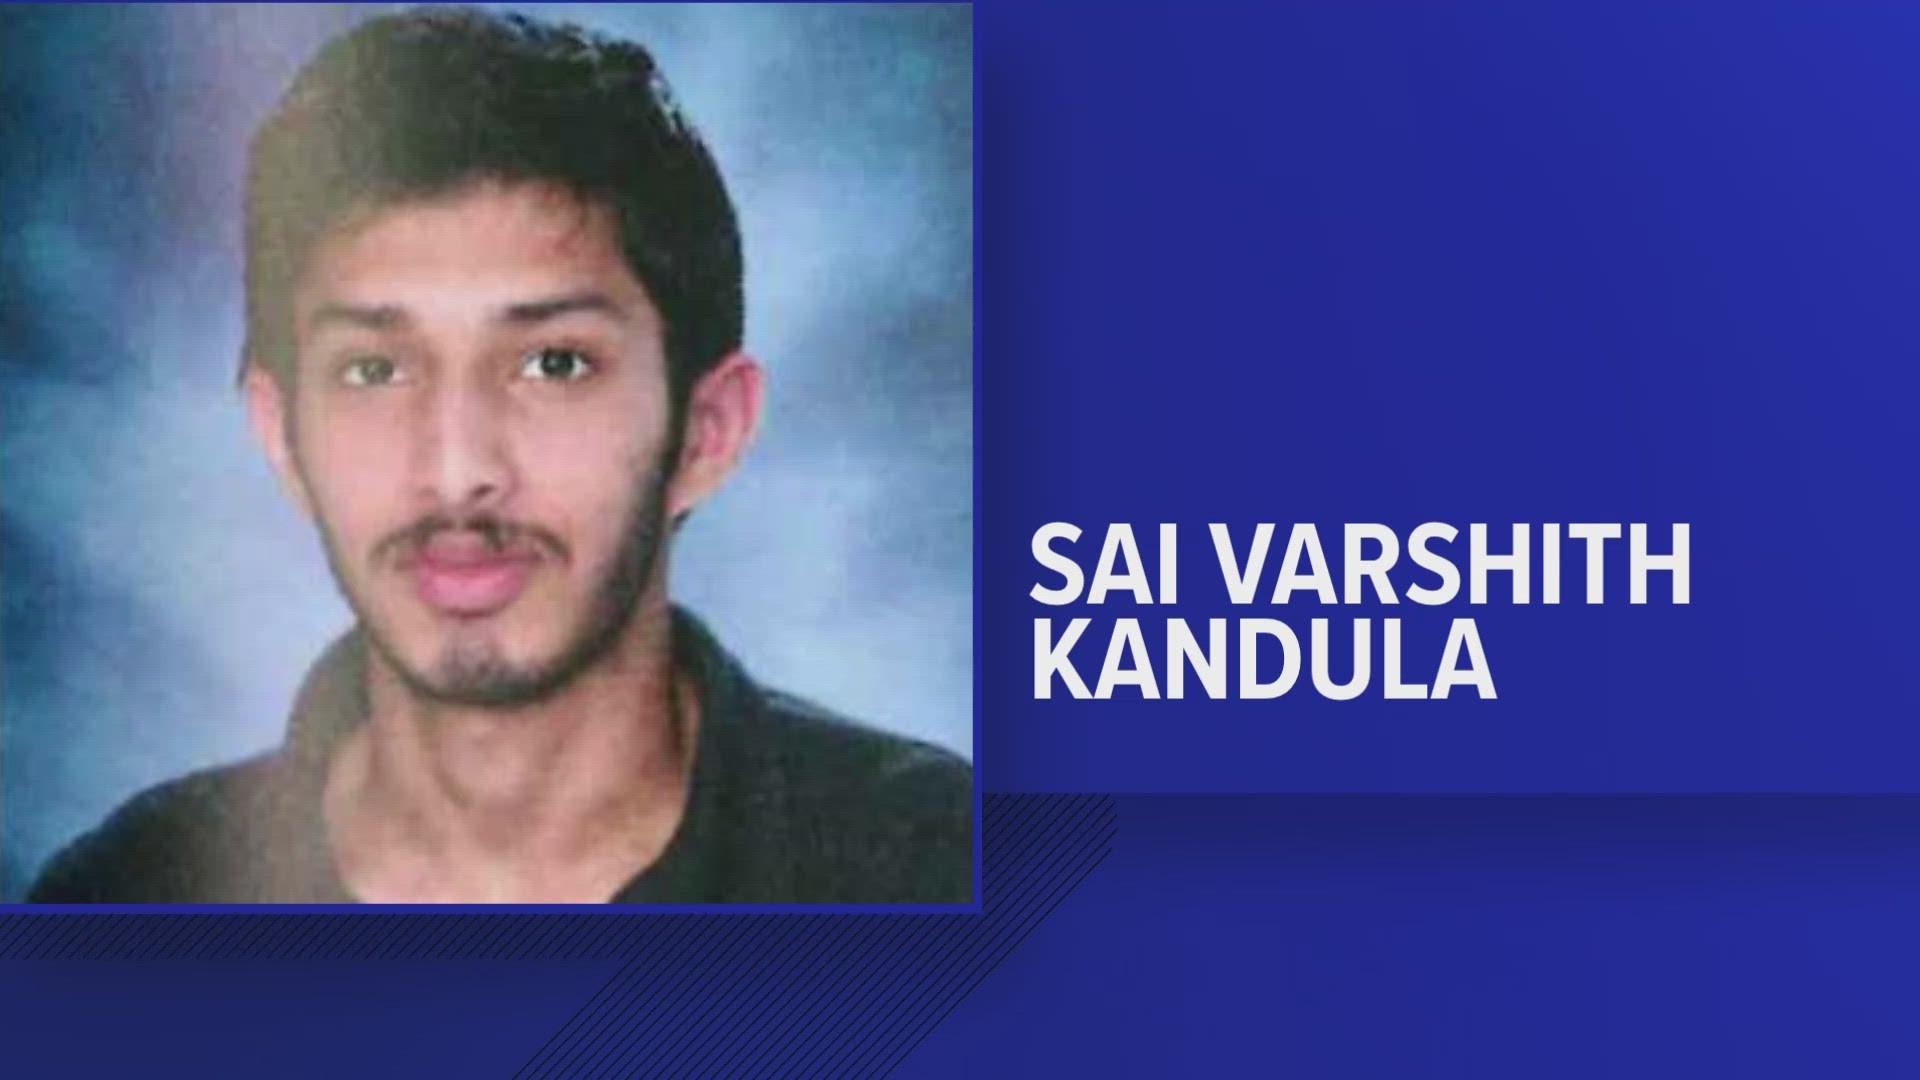 A D.C. judge ordered Sai Varshith Kandula, 19, of Chesterfield, MO held pending a hearing Wednesday in federal court.